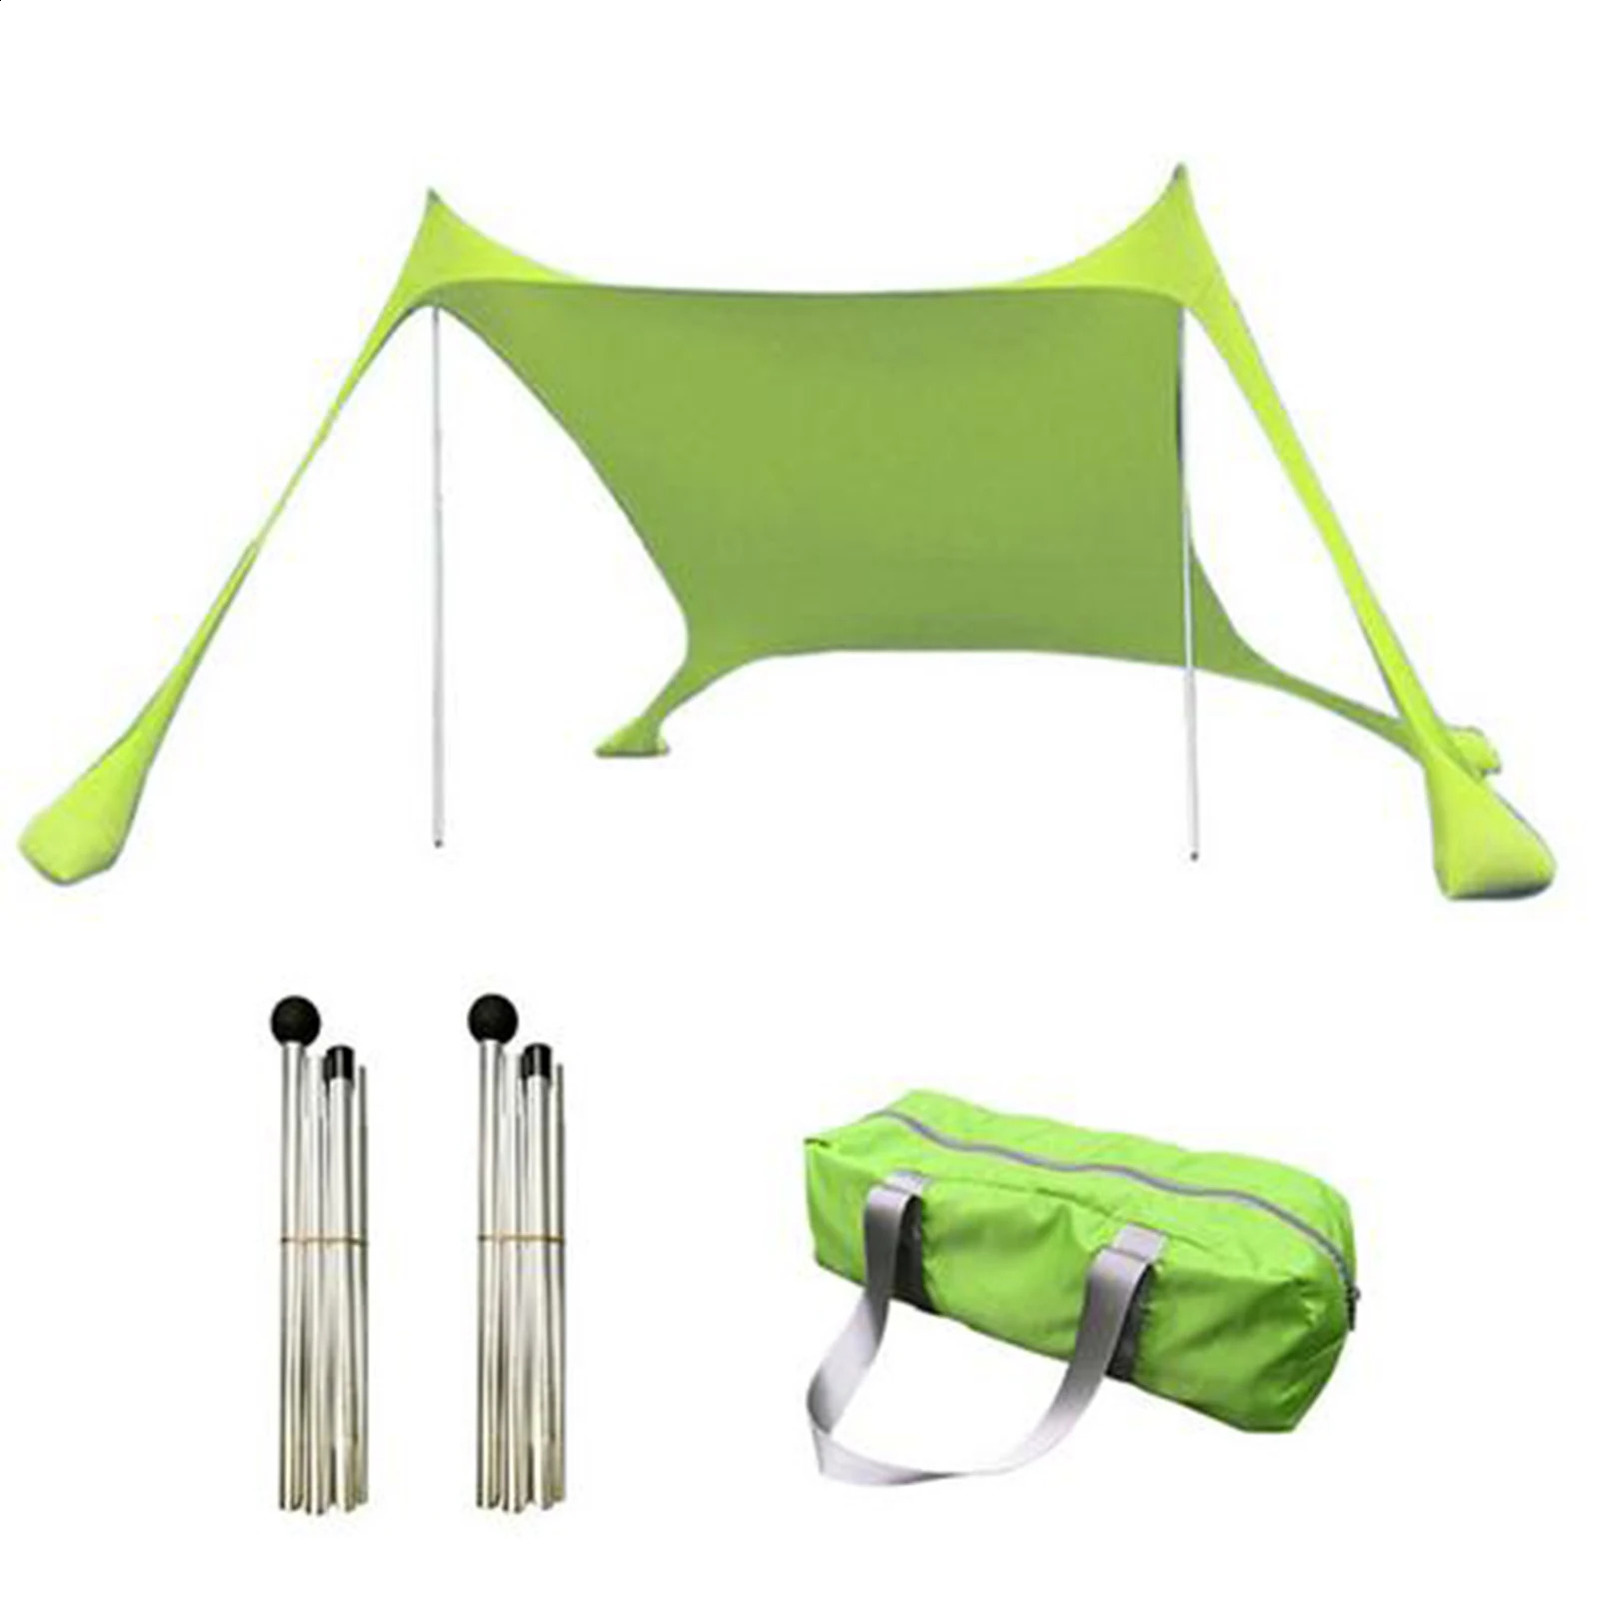 Outdoor Beach Tent Sun Shelter Camping Shades Tents Windproof Beach Canopy Tents UPF50 Portable Family Tent For Bea 240327